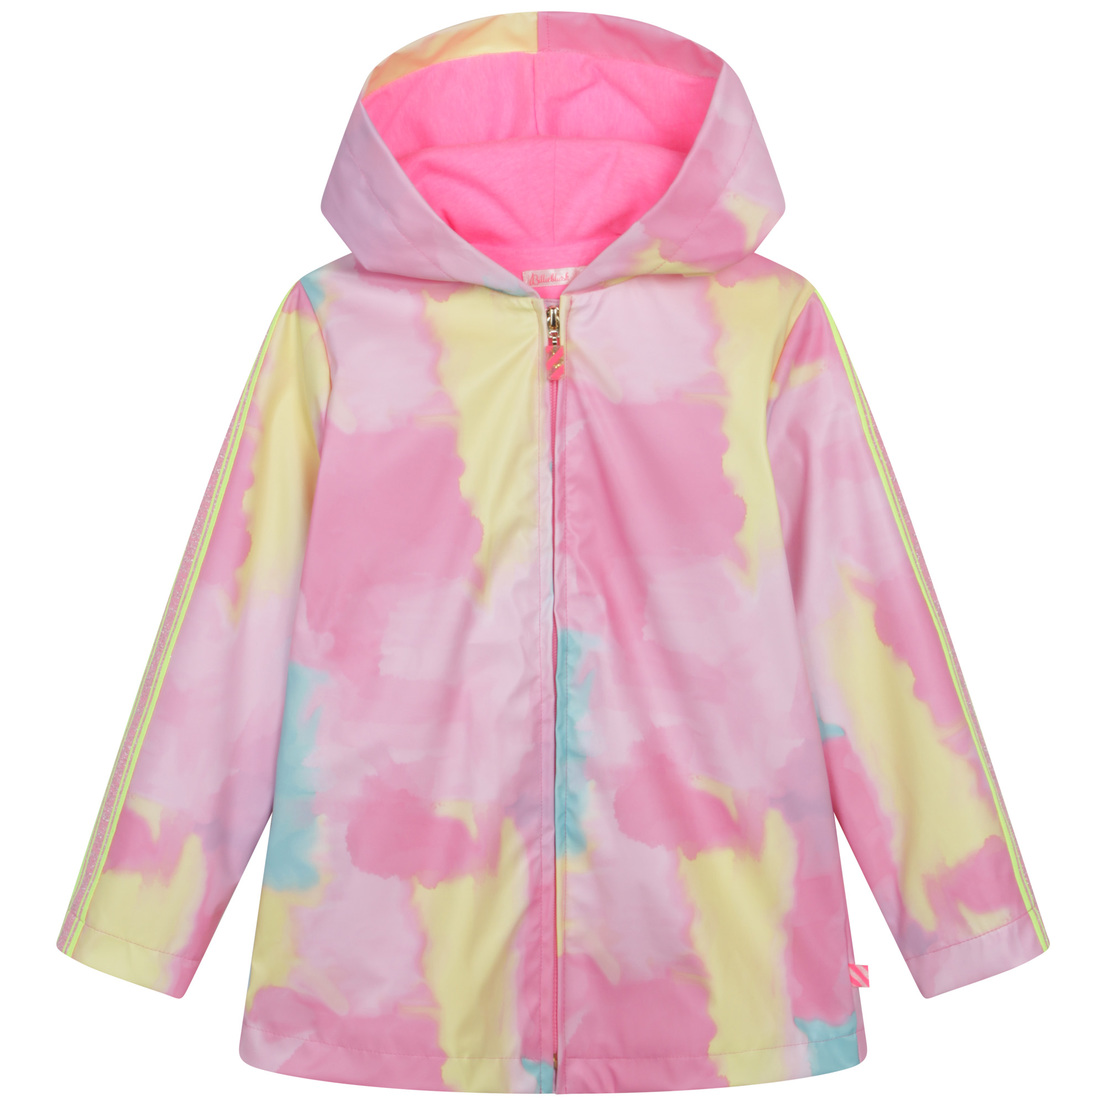 Multicolored hooded raincoat, jersey lining, zip c